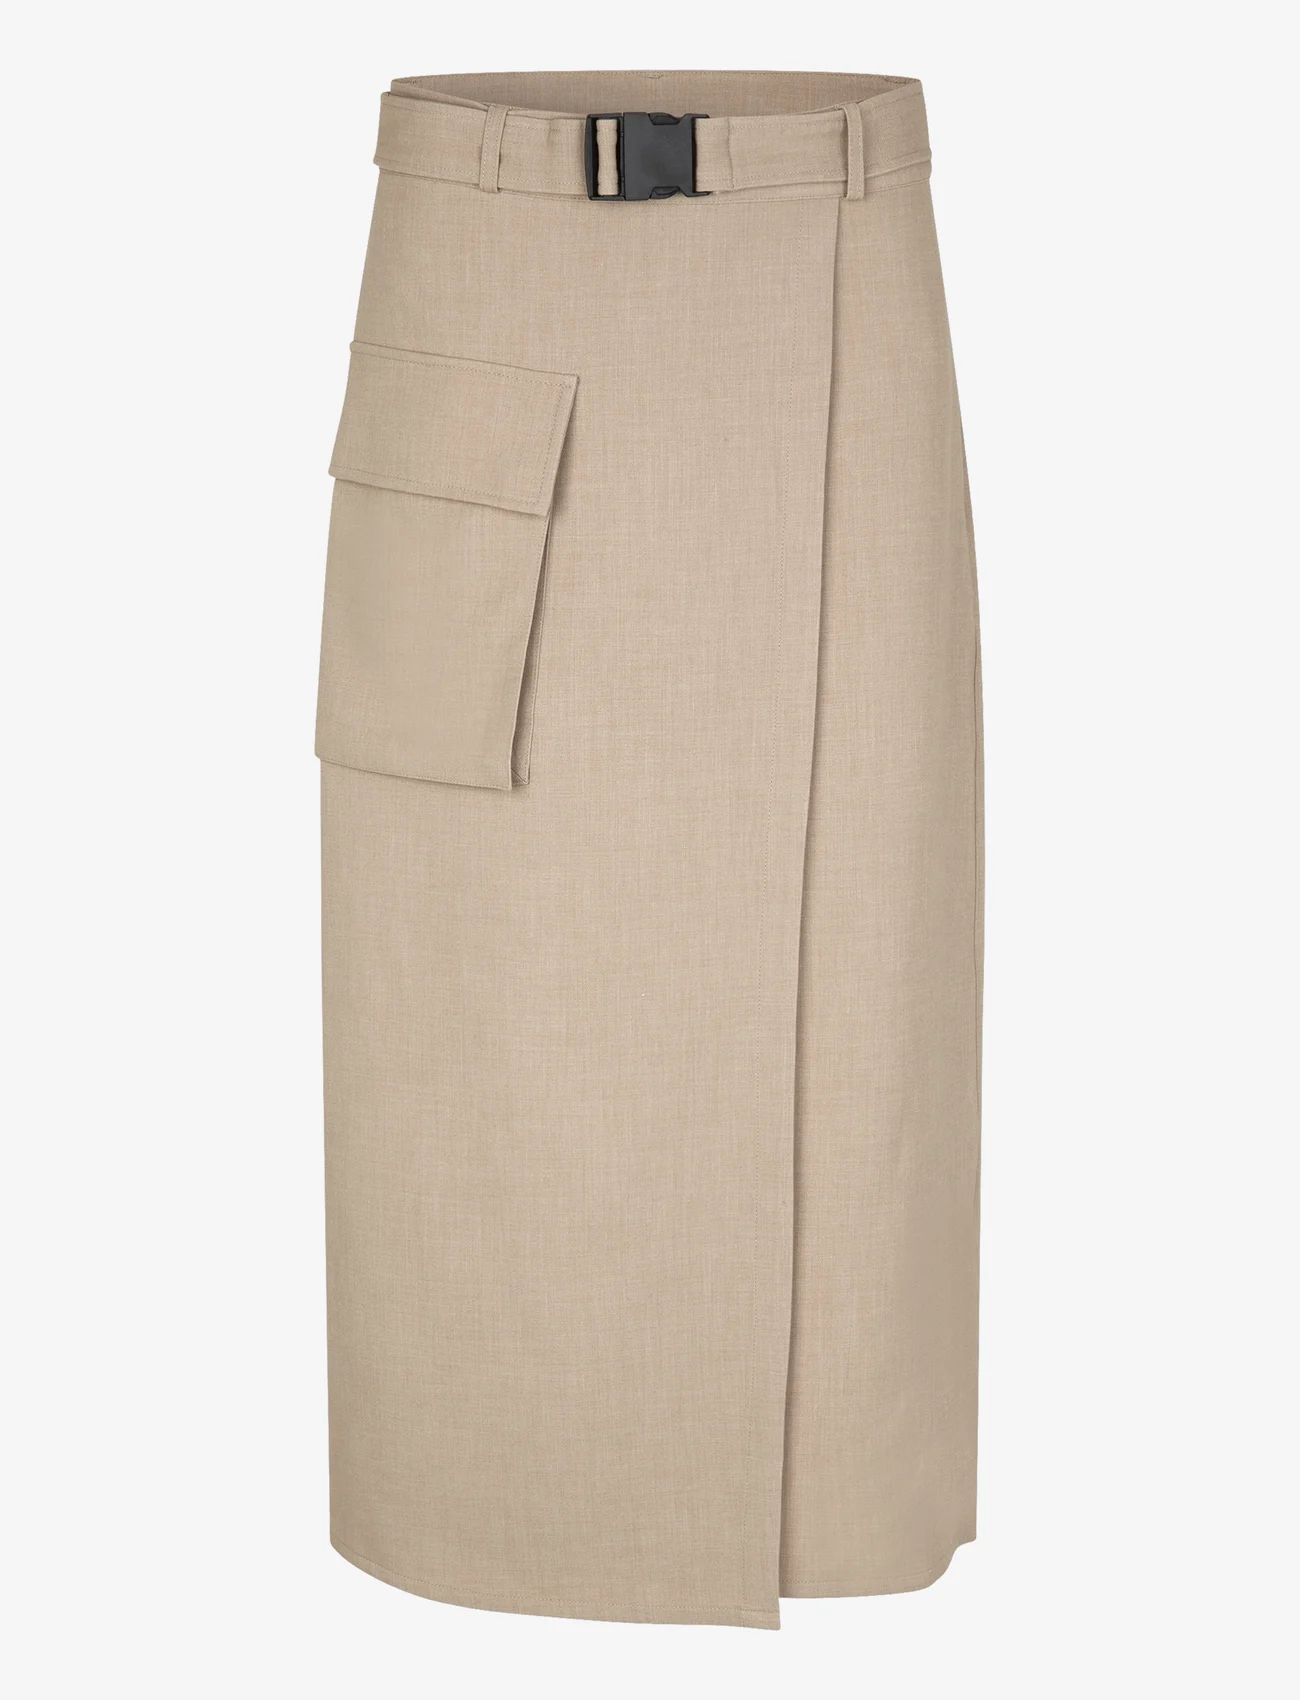 Second Female - Felice Skirt - party wear at outlet prices - roasted cashew - 0